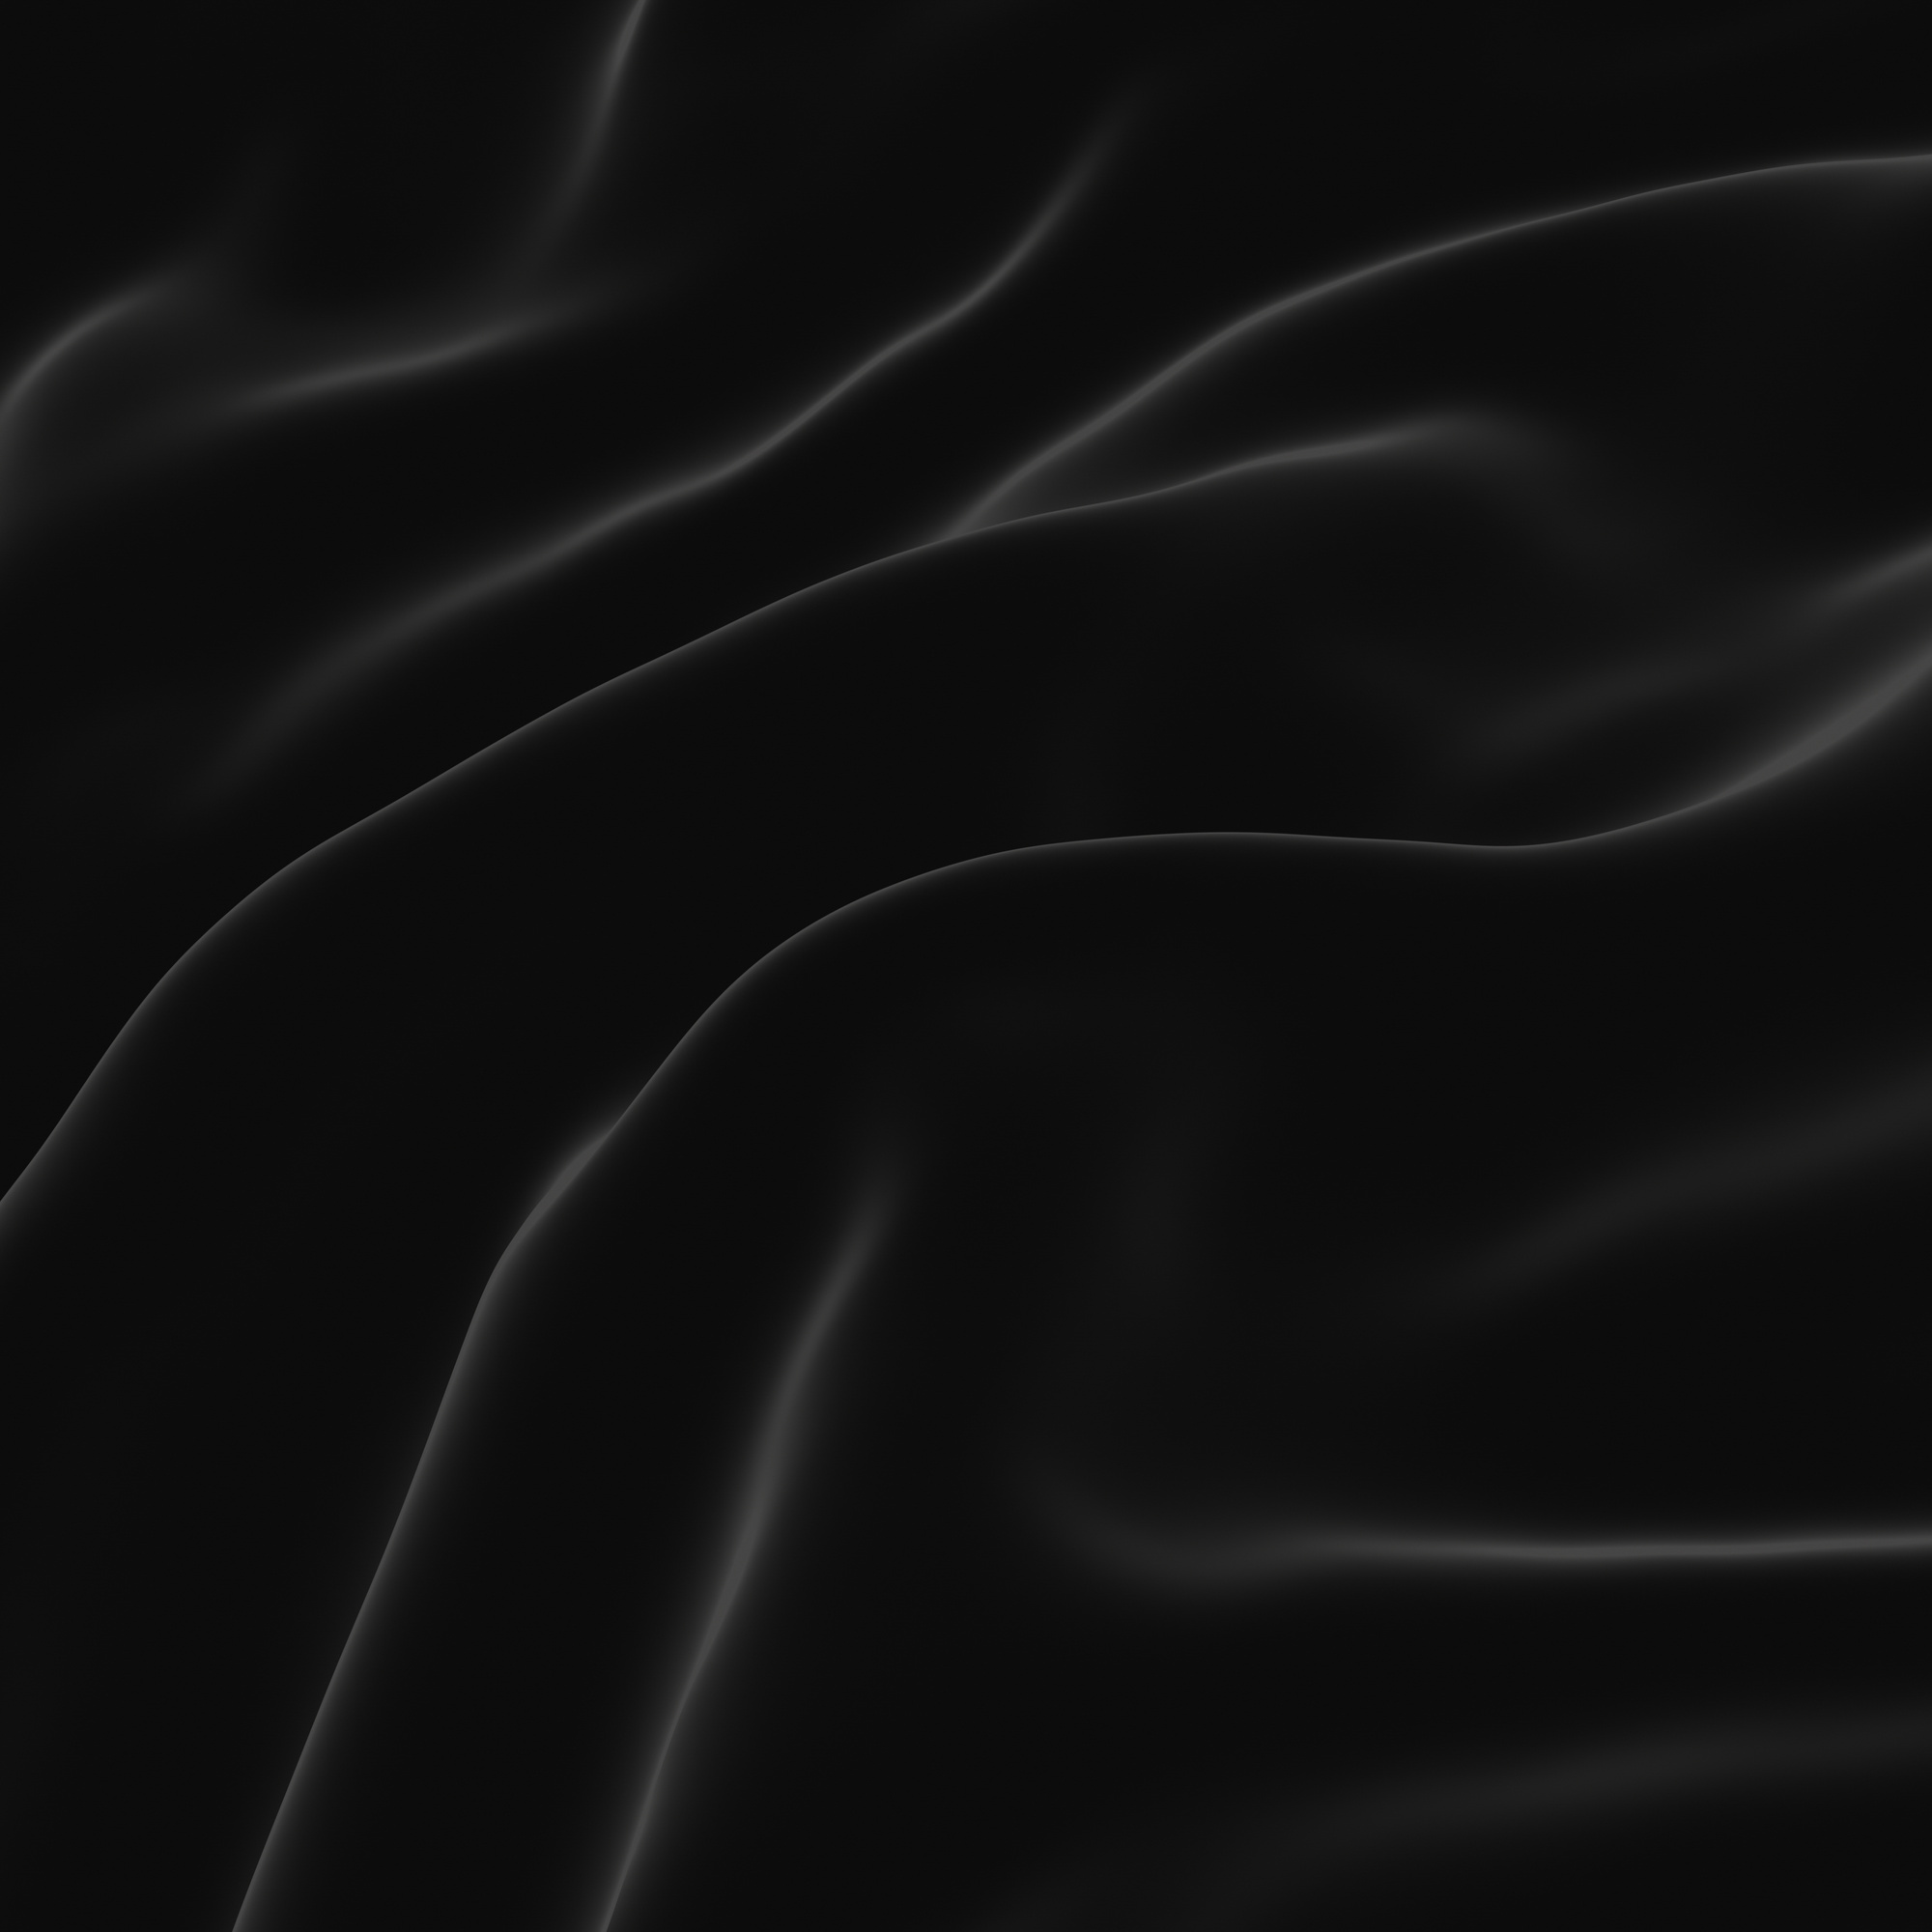 Abstract Black Wave Background. Dark Rippled Cloth.